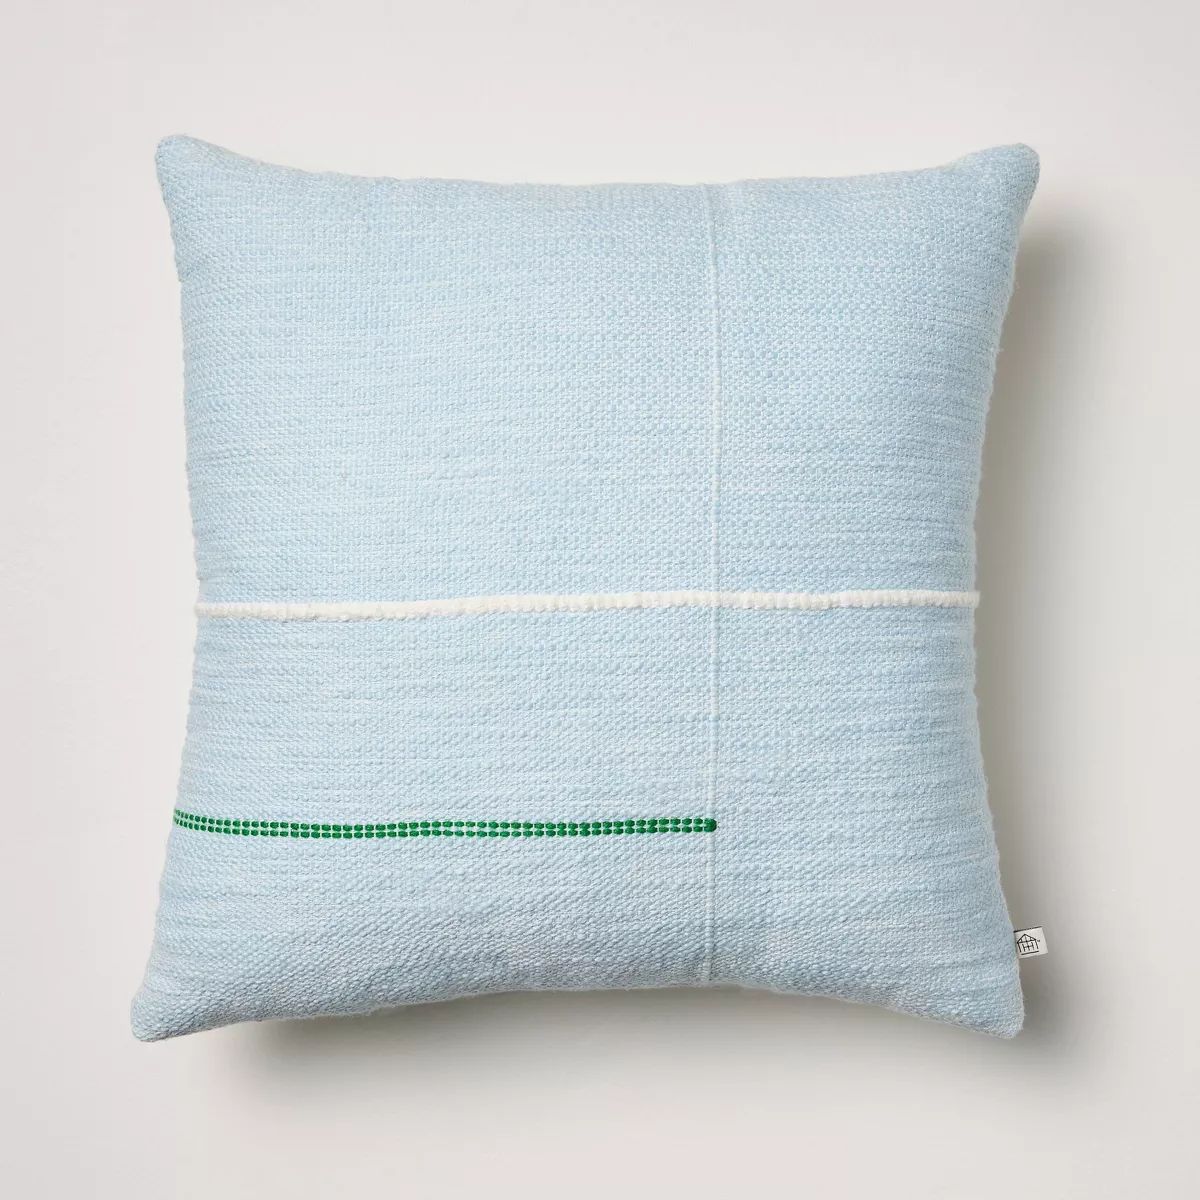 18"x18" Asymmetrical Stripe Indoor/Outdoor Square Throw Pillow - Hearth & Hand™ with Magnolia | Target